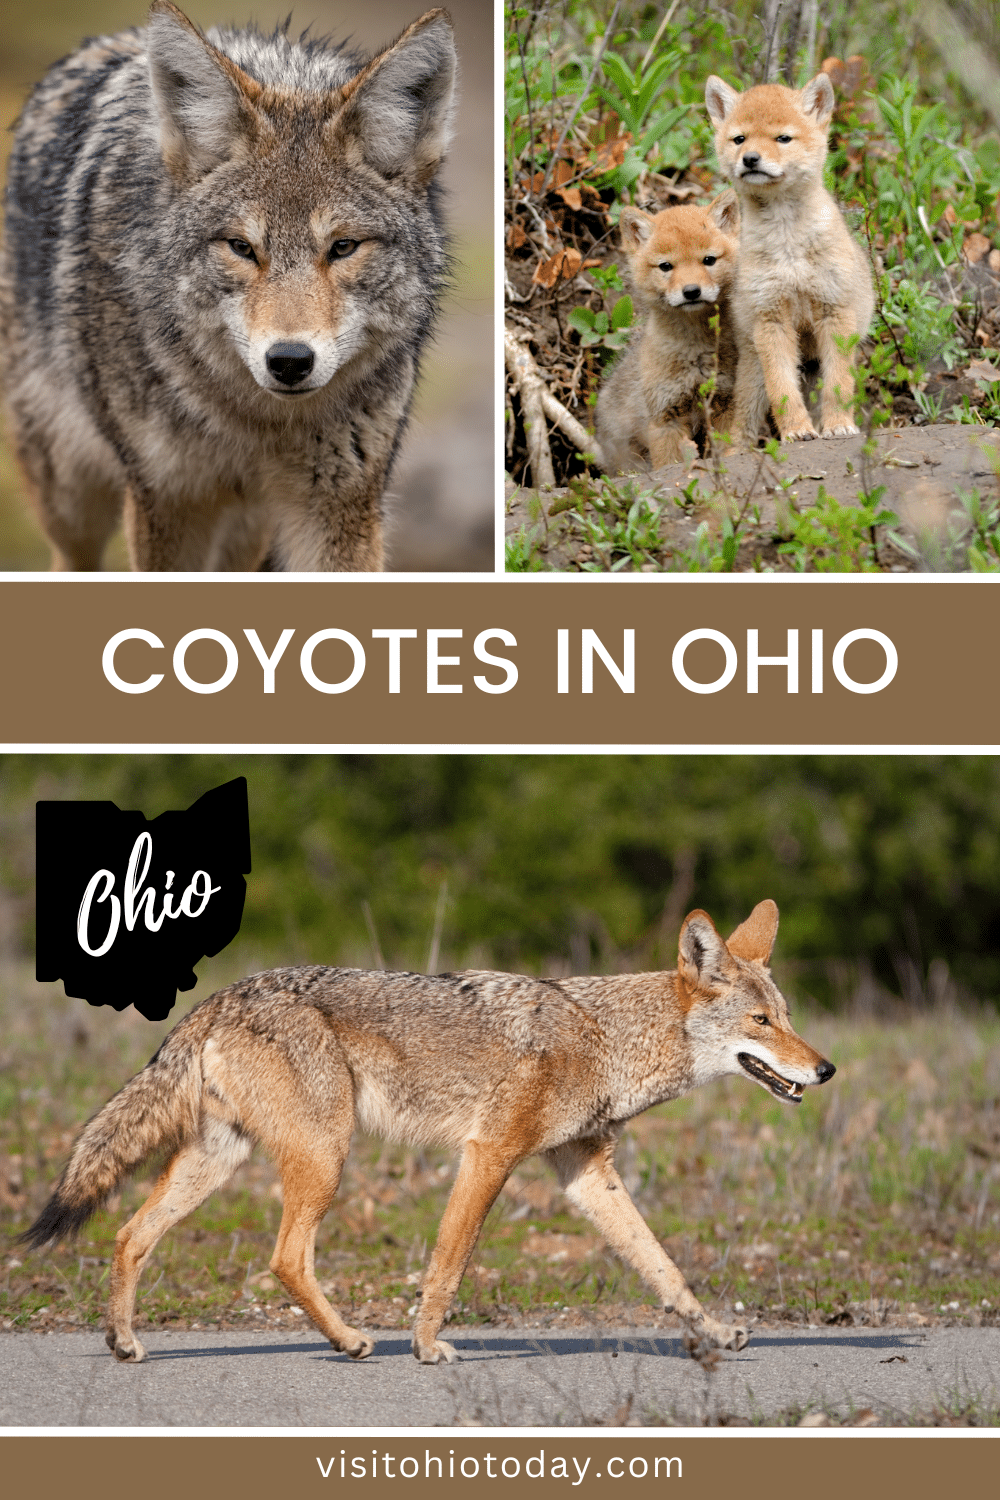 Did you know that coyotes are native to Ohio? Even though they are not native to these parts, they have decided to call Ohio their home and coyotes can be found throughout the state of Ohio. The scientific name of the coyote is Canis latrans.